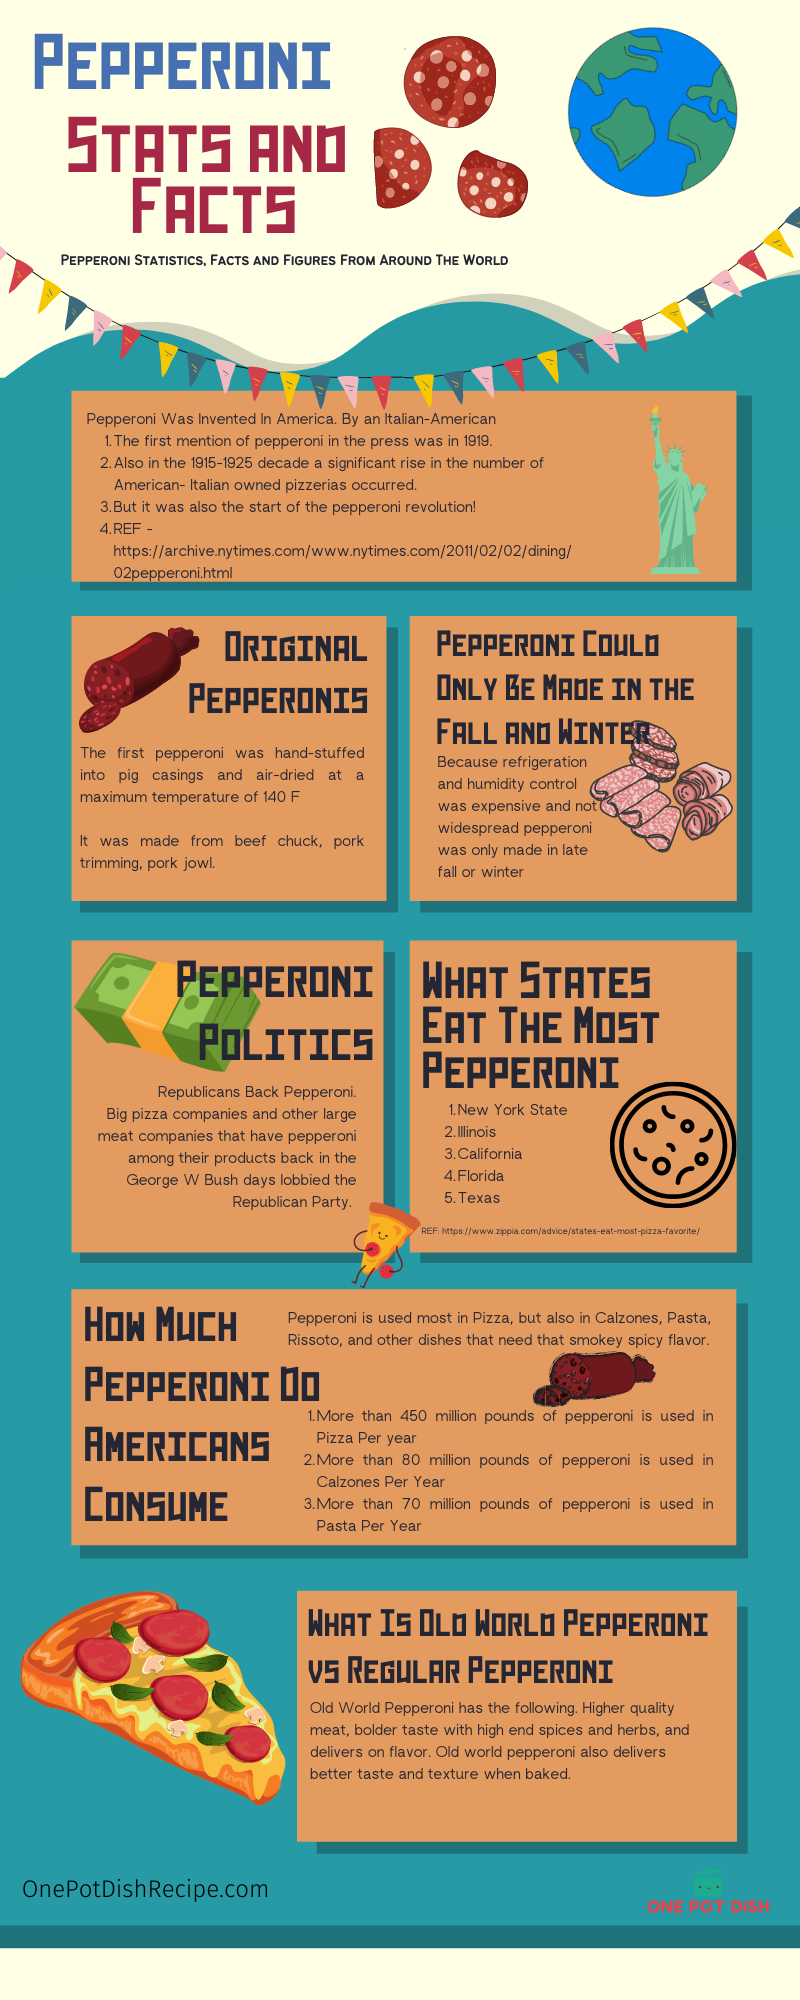 Different Pepperoni Statistics, Facts and Figures